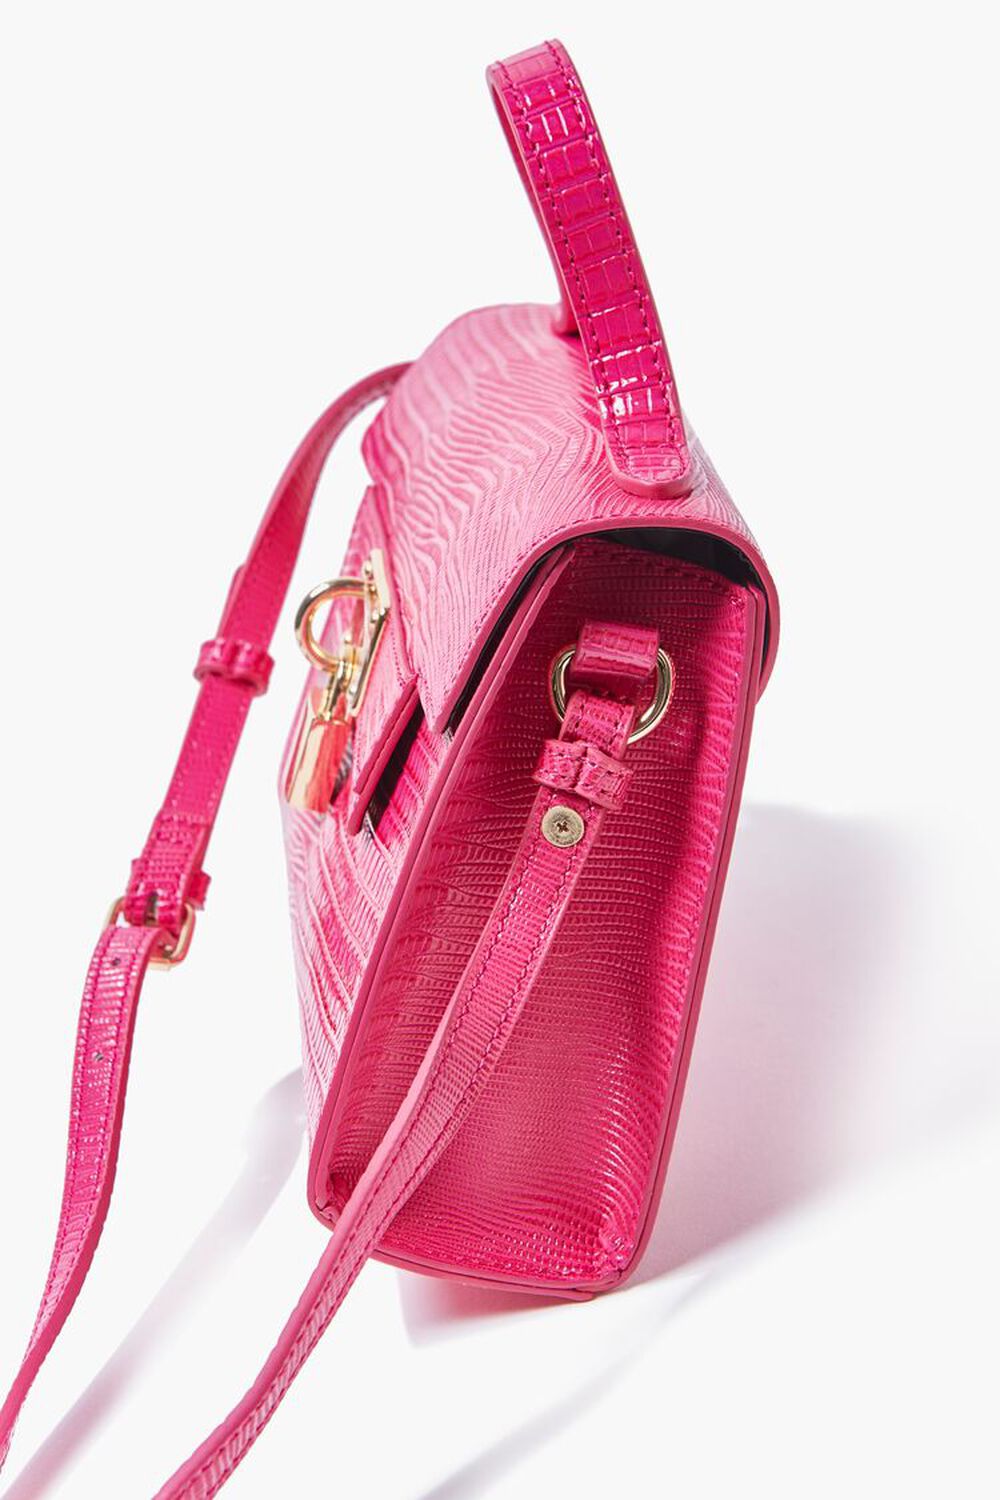 Pink Croc Leather With Crystal Cross - Forever Treasures Boutique